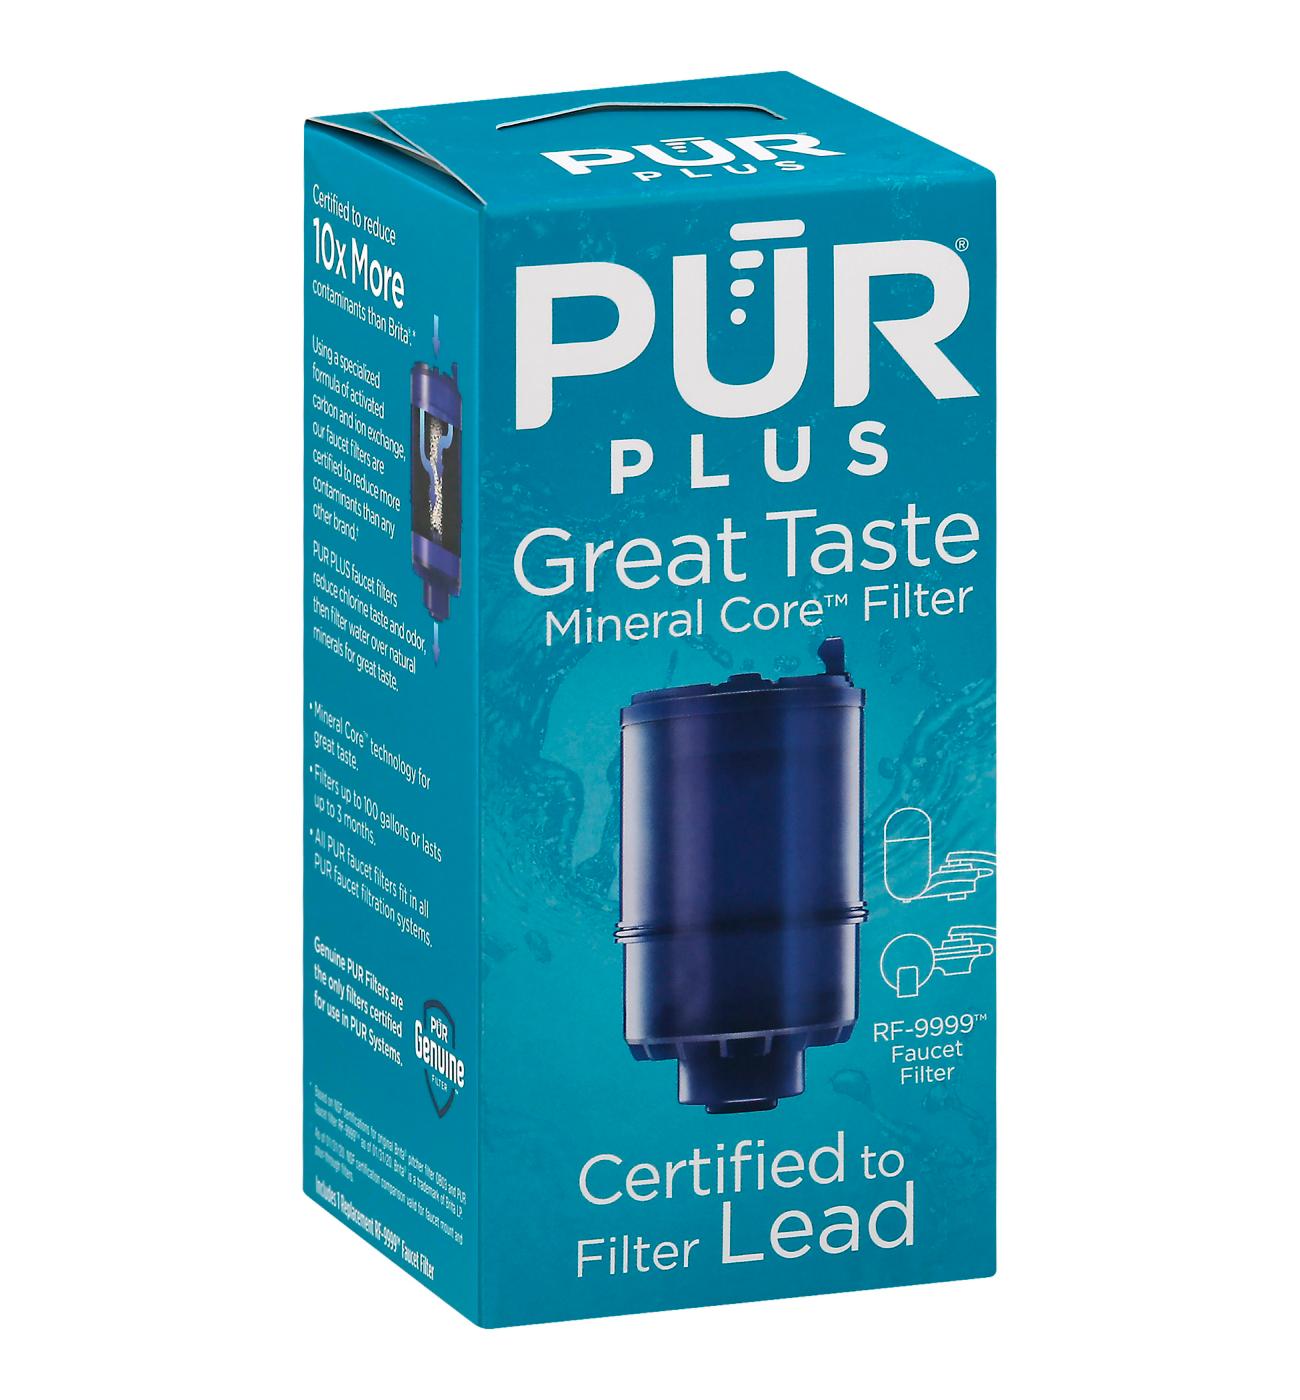 PUR Plus Mineral Core Faucet Filter; image 2 of 2